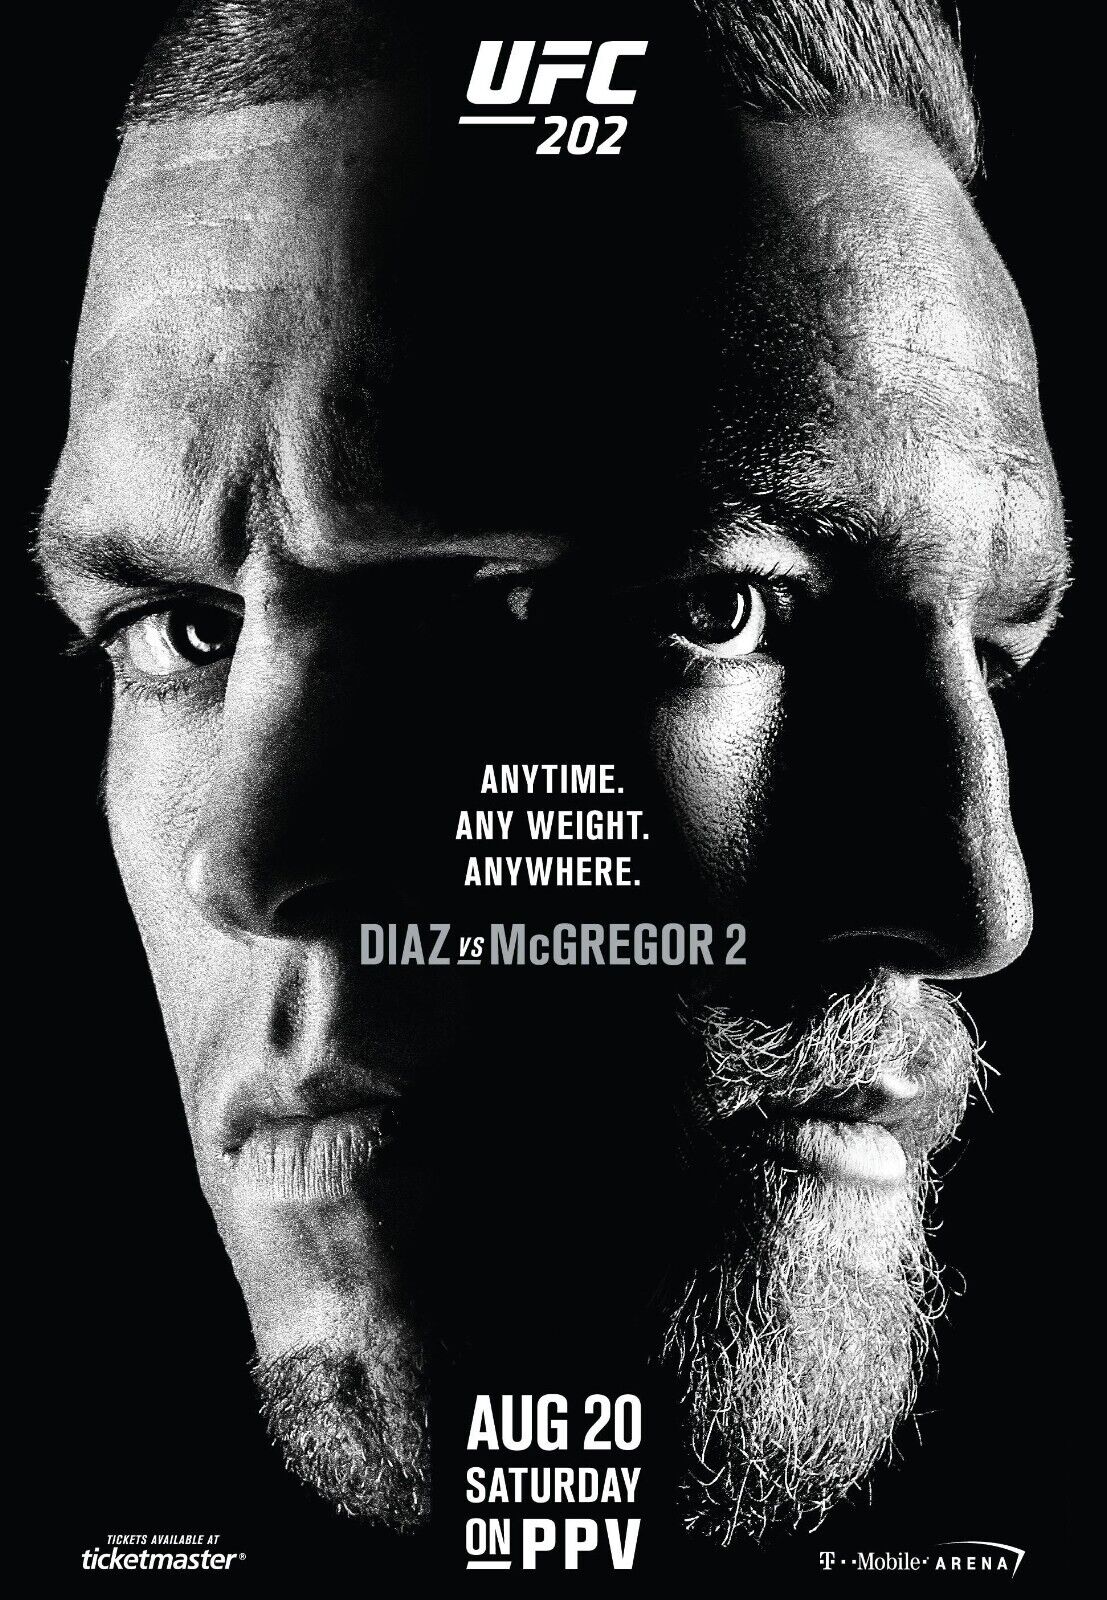 UFC 202 Fight Poster 11x17 Inches - Nate Diaz vs Conor McGregor II 2 | NEW